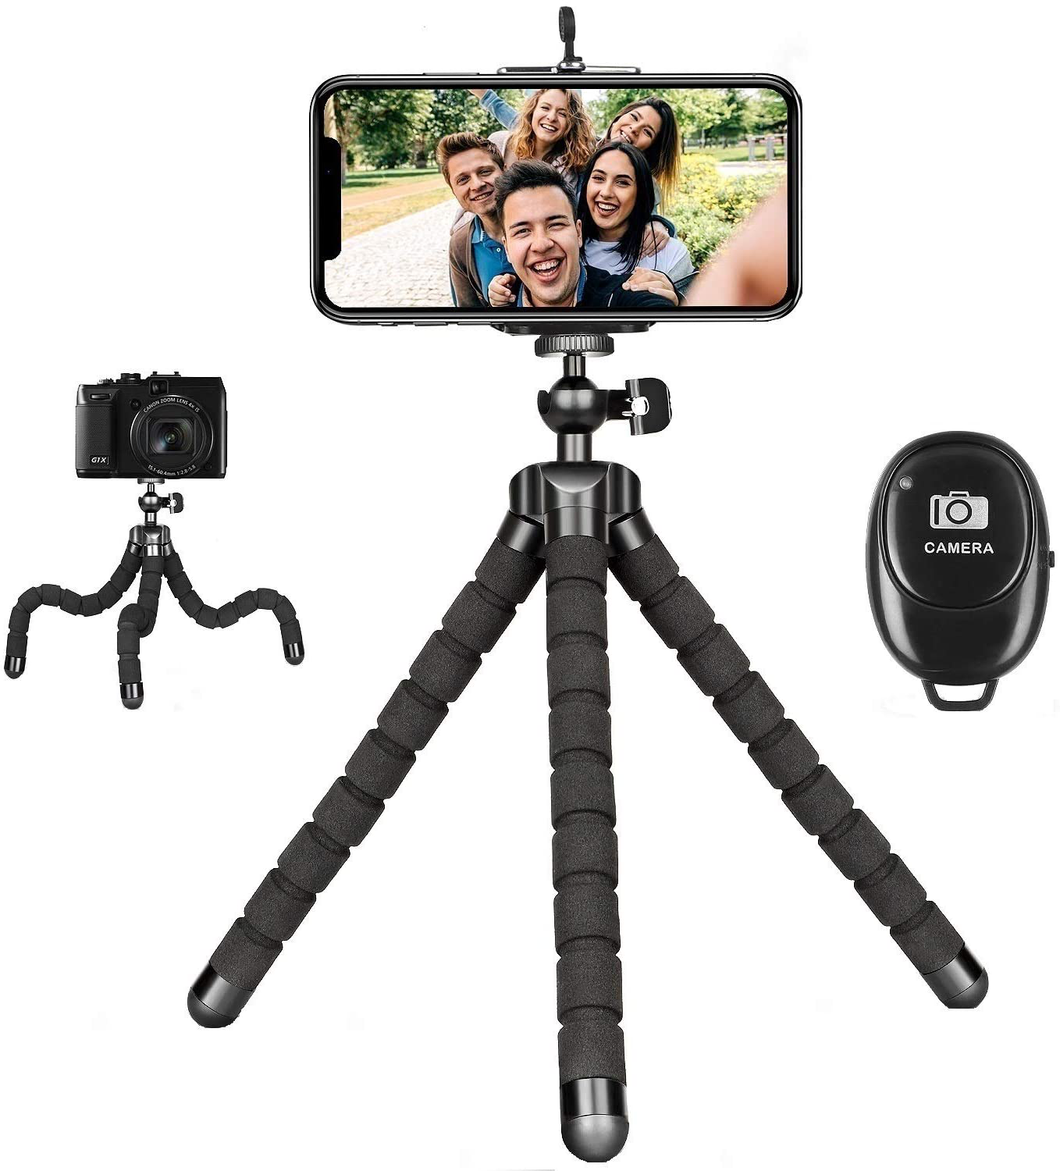 Flexible Phone Tripod with Wireless Remote, Mini Tripod Stand for Iphone 13 12 Mini 11 Pro XS Max XR X Samsung Android Camera Adjustable Iphone Tripod Stand for Video Recording Vlogging